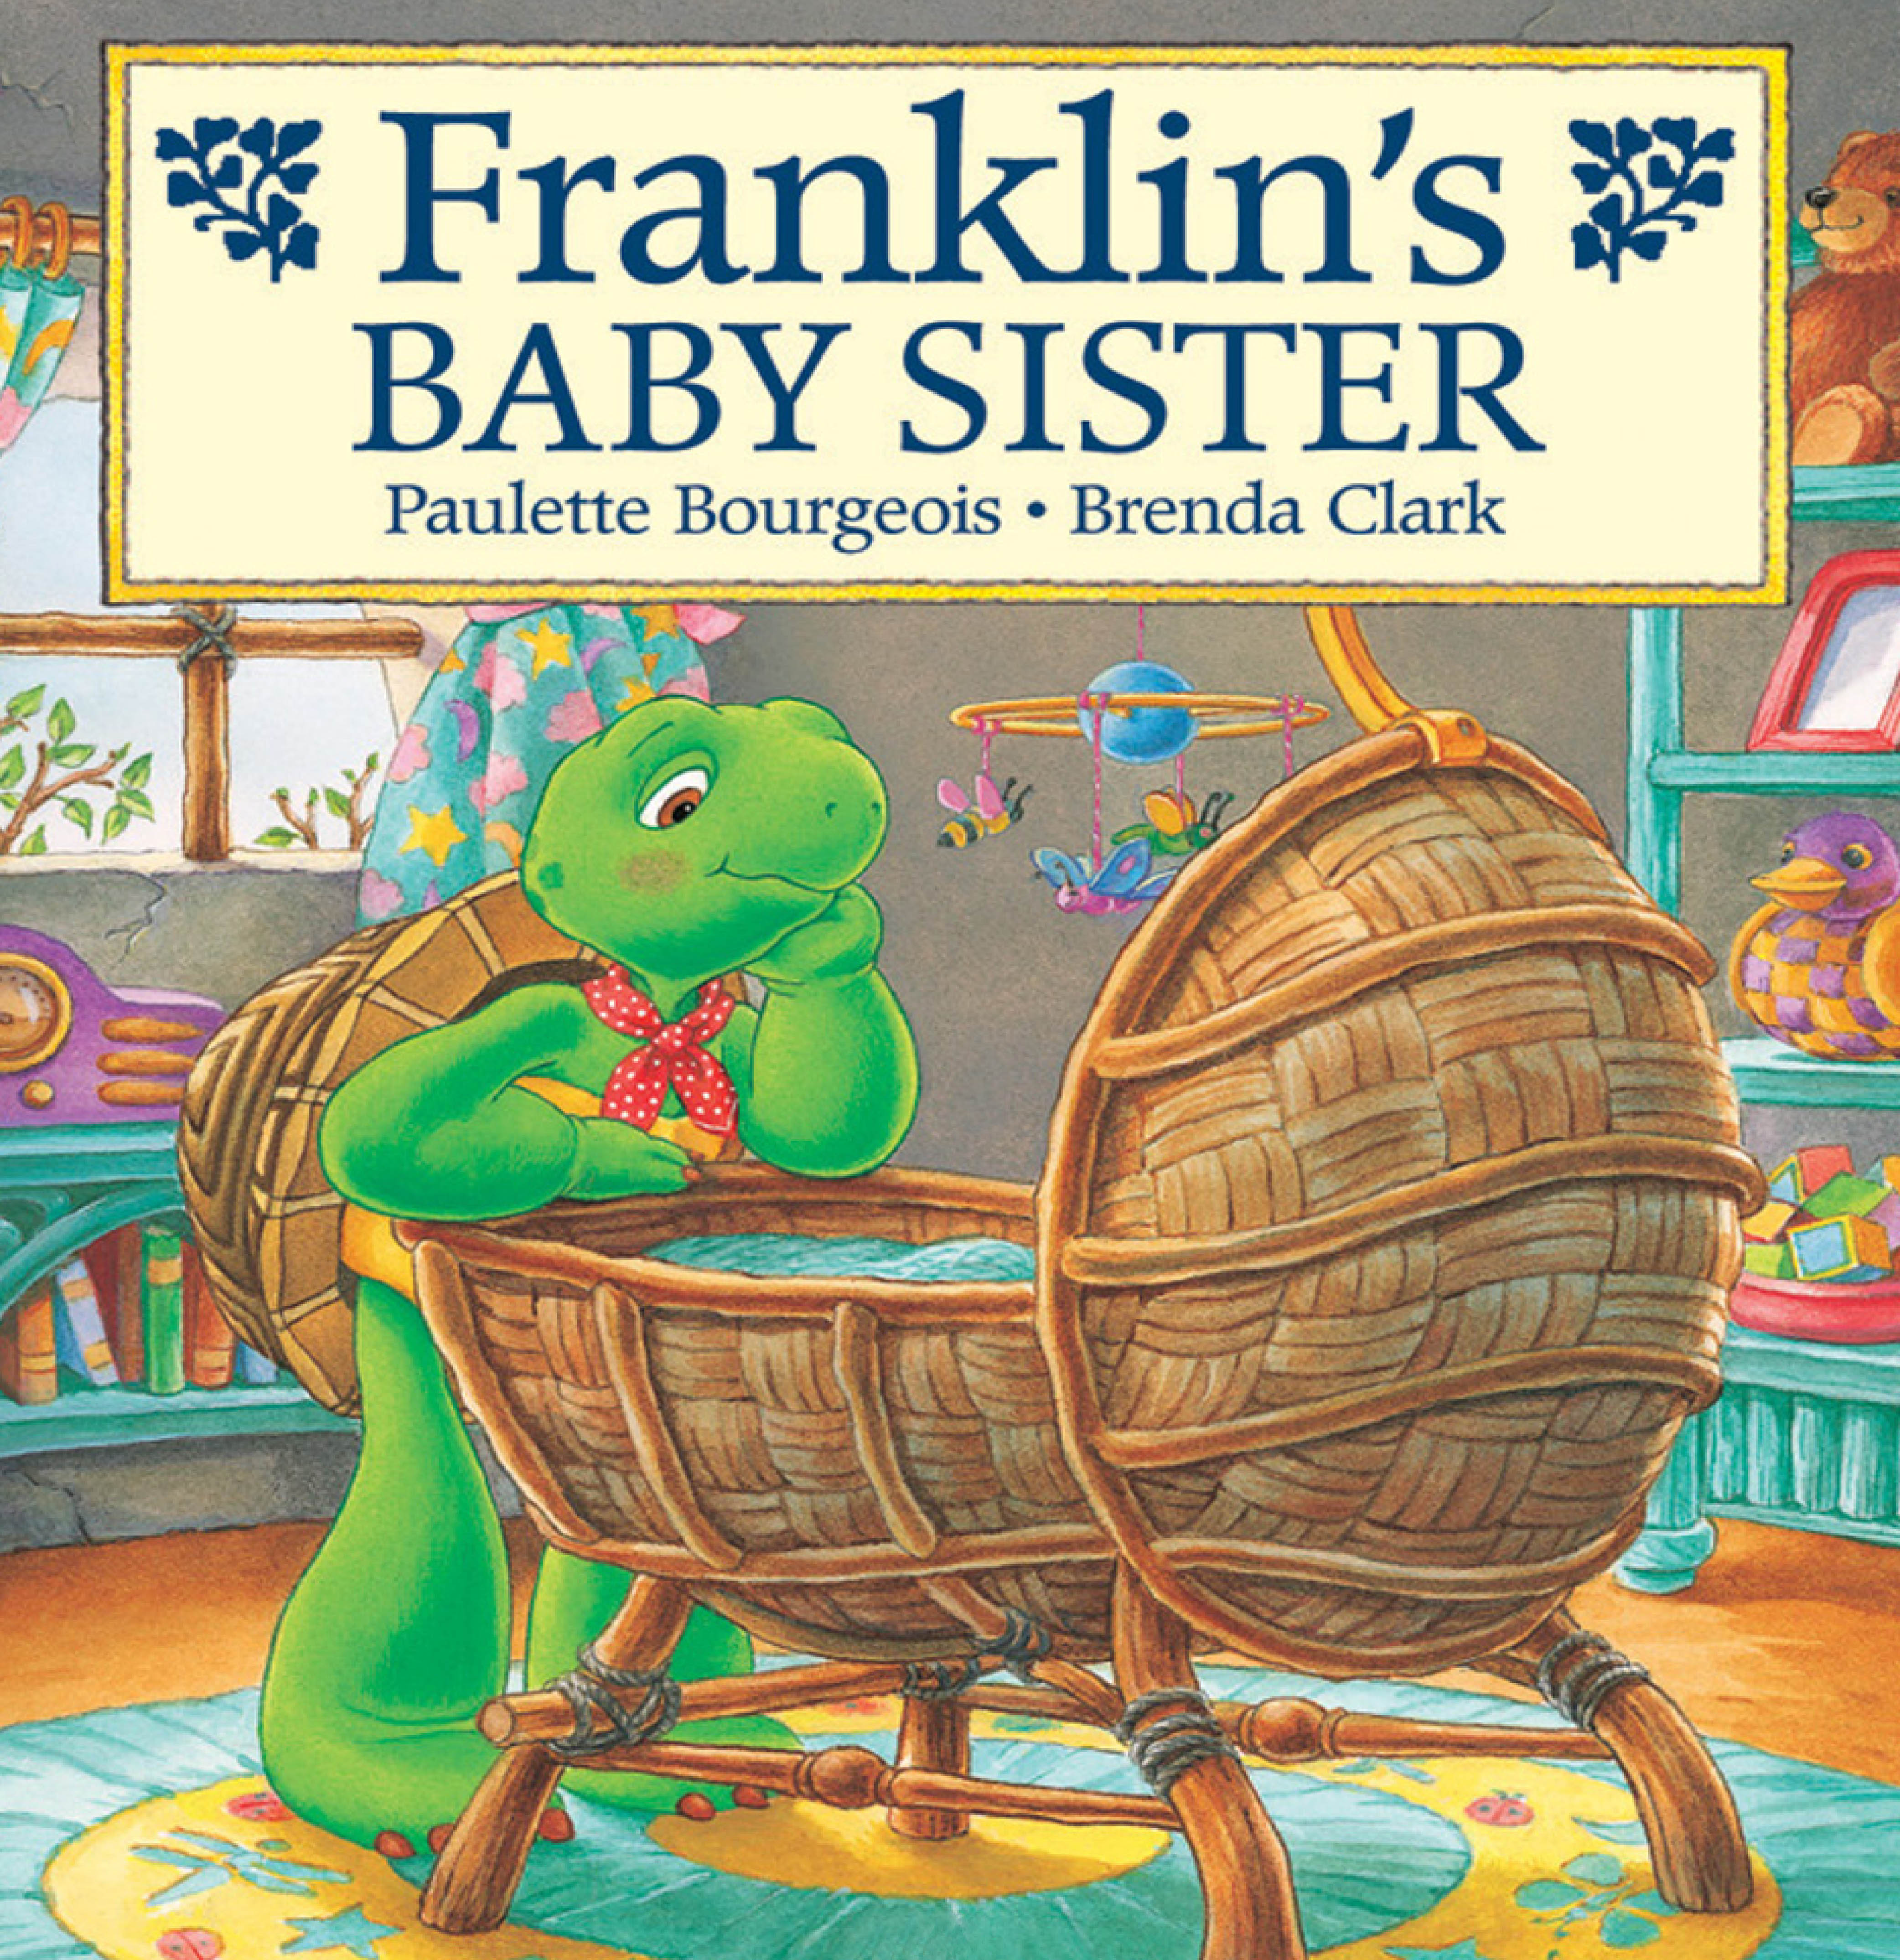 Franklin's Baby Sister.